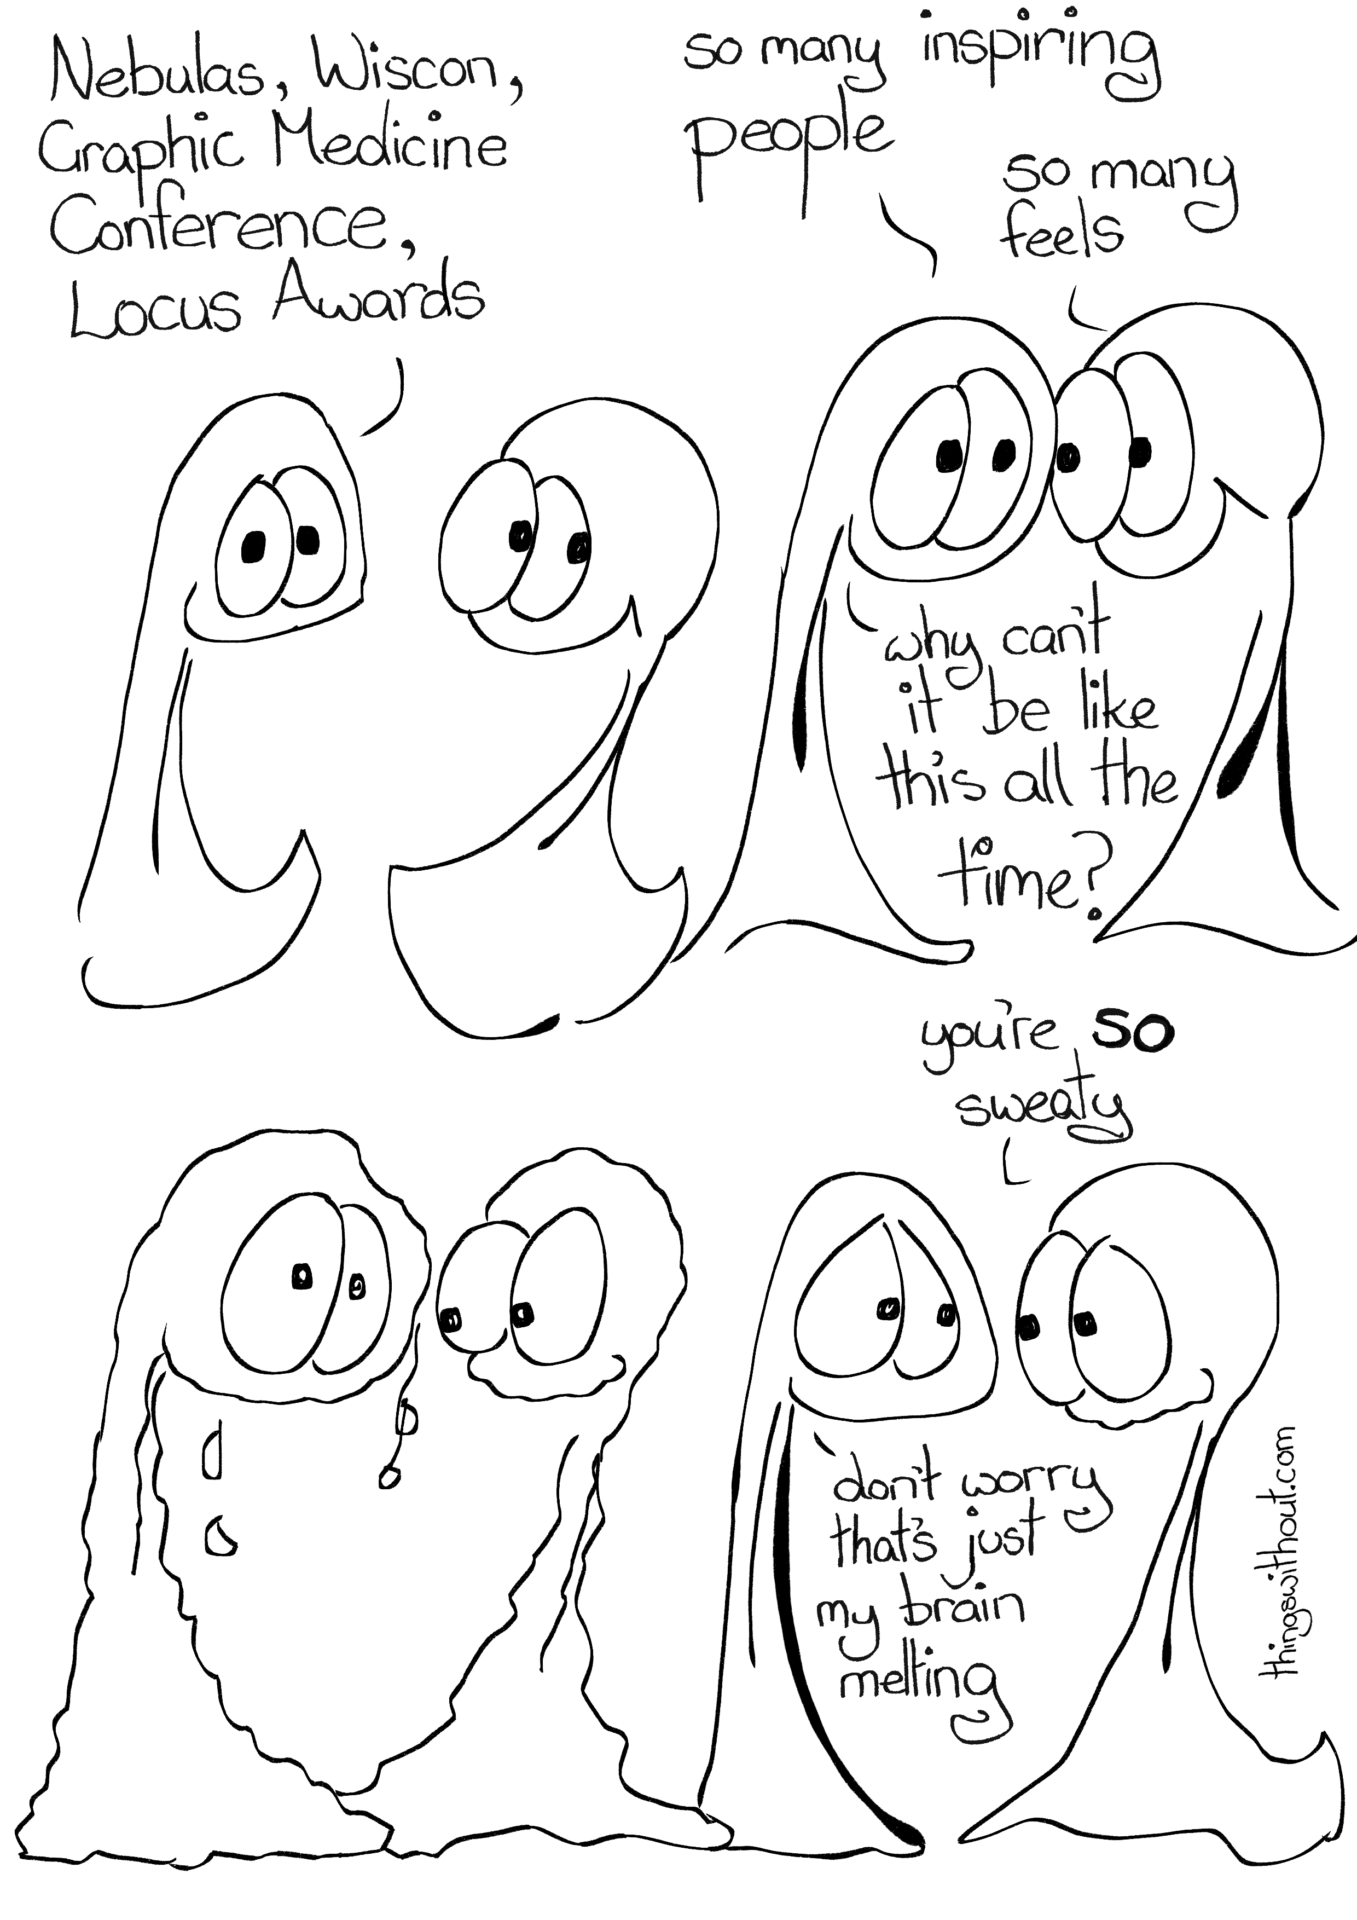 538: After the Locus Awards!